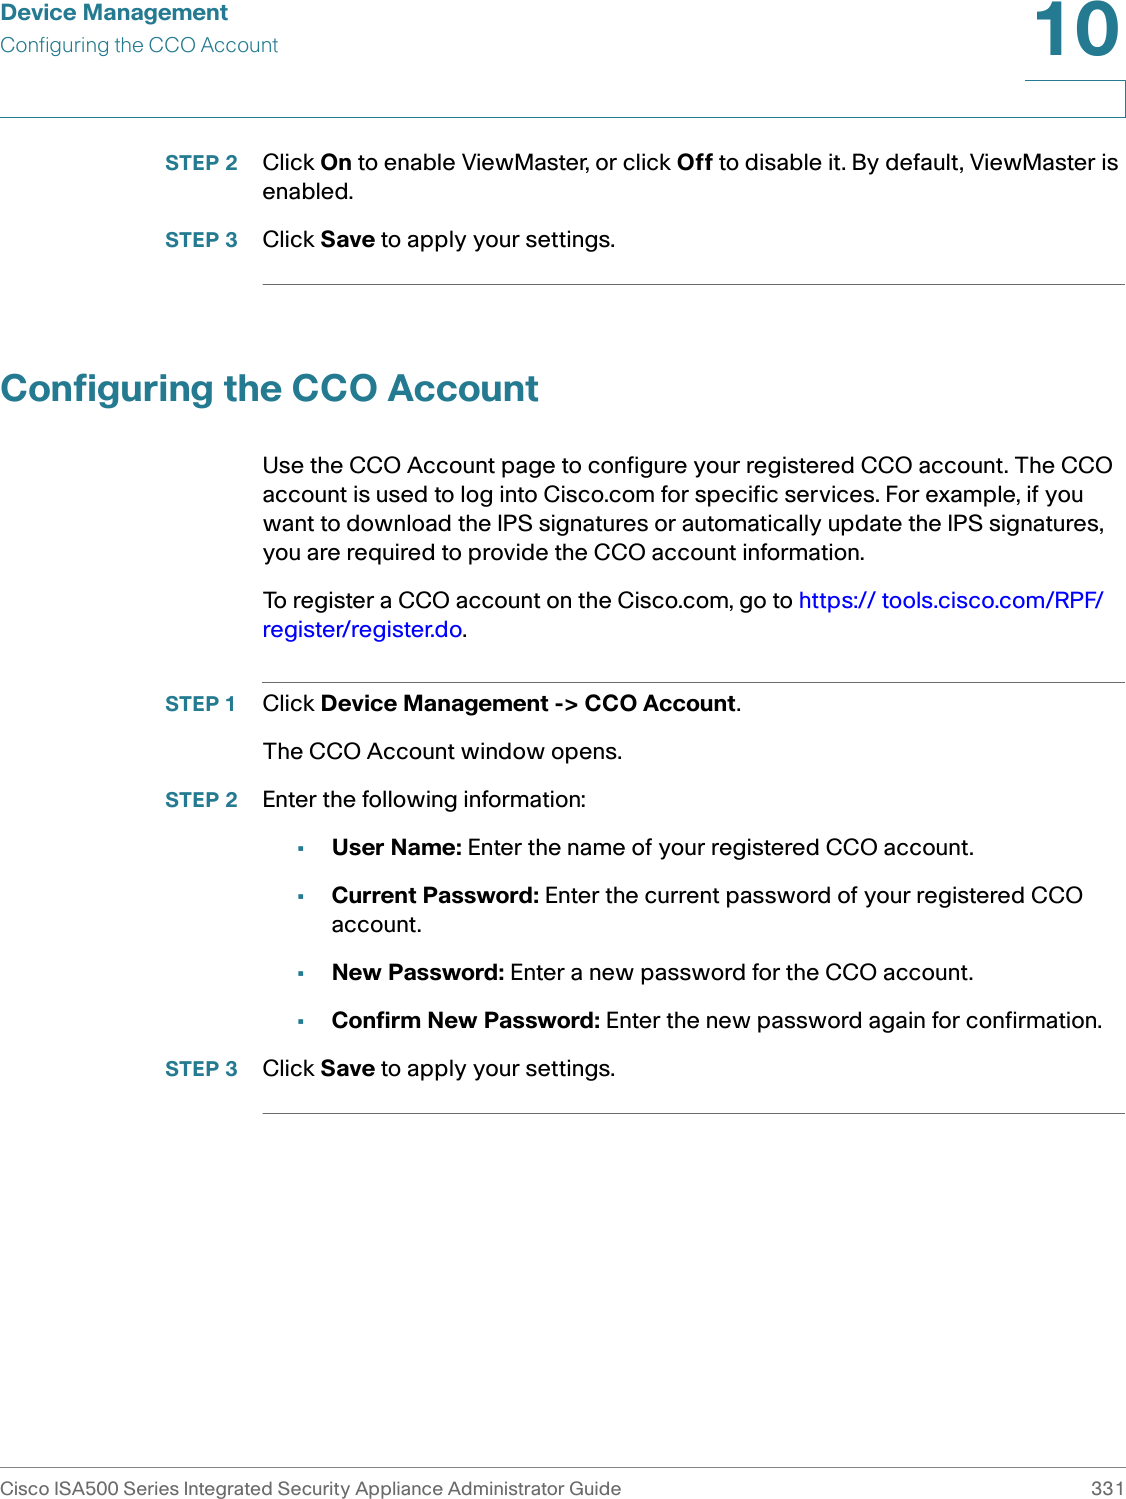 Device ManagementConfiguring the CCO AccountCisco ISA500 Series Integrated Security Appliance Administrator Guide 33110 STEP 2 Click On to enable ViewMaster, or click Off to disable it. By default, ViewMaster is enabled. STEP 3 Click Save to apply your settings. Configuring the CCO AccountUse the CCO Account page to configure your registered CCO account. The CCO account is used to log into Cisco.com for specific services. For example, if you want to download the IPS signatures or automatically update the IPS signatures, you are required to provide the CCO account information. To register a CCO account on the Cisco.com, go to https:// tools.cisco.com/RPF/register/register.do.STEP 1 Click Device Management -&gt; CCO Account.The CCO Account window opens.STEP 2 Enter the following information: •User Name: Enter the name of your registered CCO account.•Current Password: Enter the current password of your registered CCO account.•New Password: Enter a new password for the CCO account.•Confirm New Password: Enter the new password again for confirmation.STEP 3 Click Save to apply your settings. 